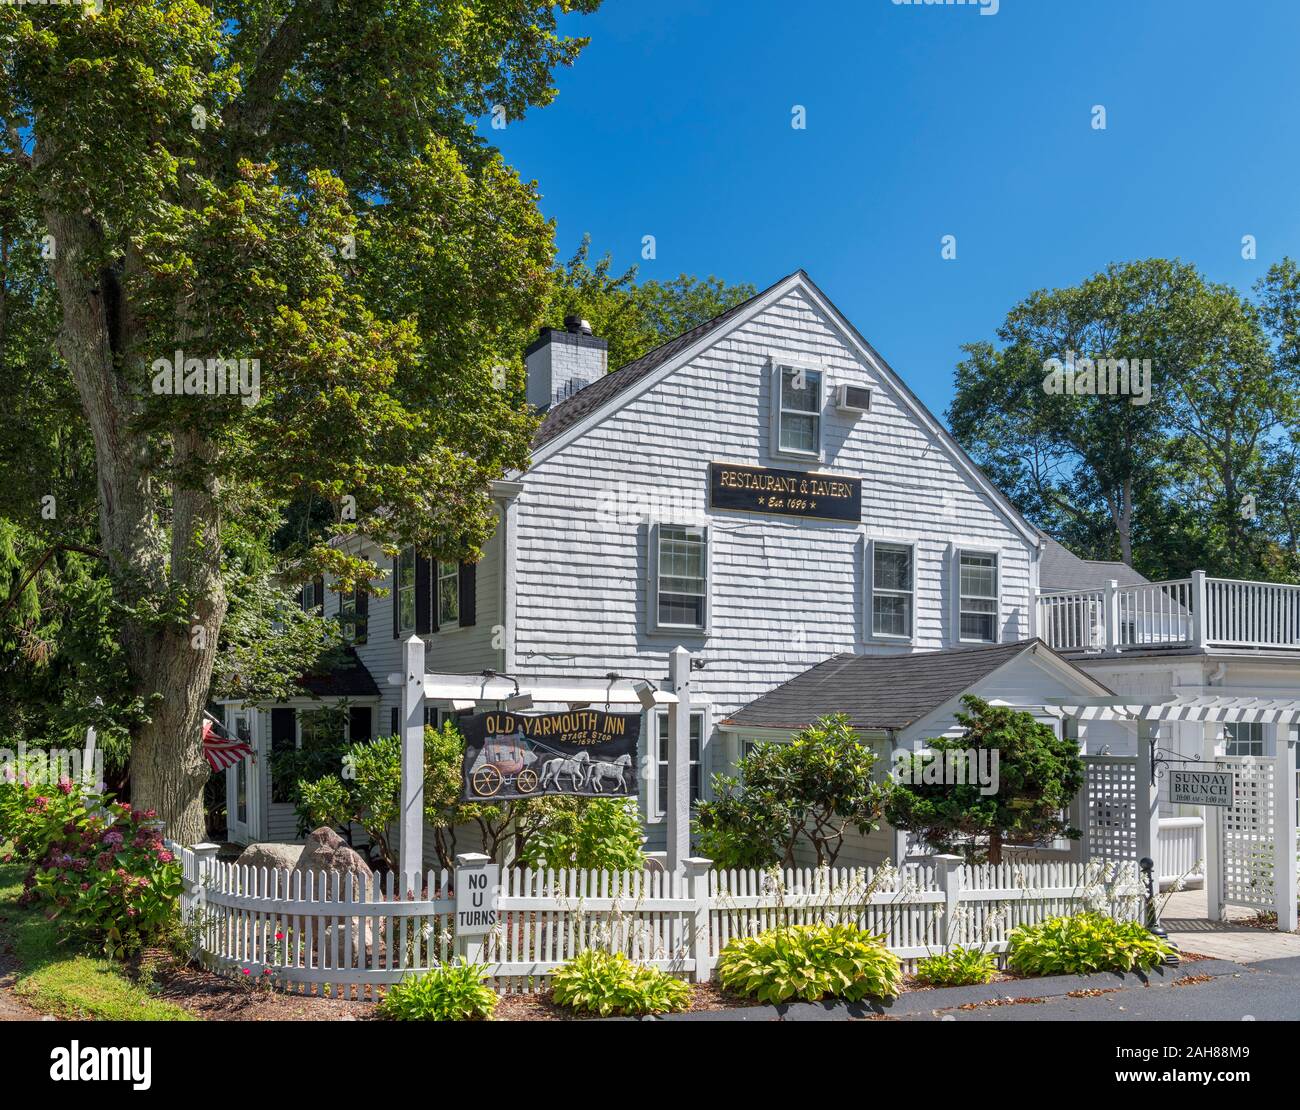 The historic 17th century Old Yarmouth Inn, Old King's Highway, Yarmouth Port, Cape Cod, Massachusetts, USA Stock Photo